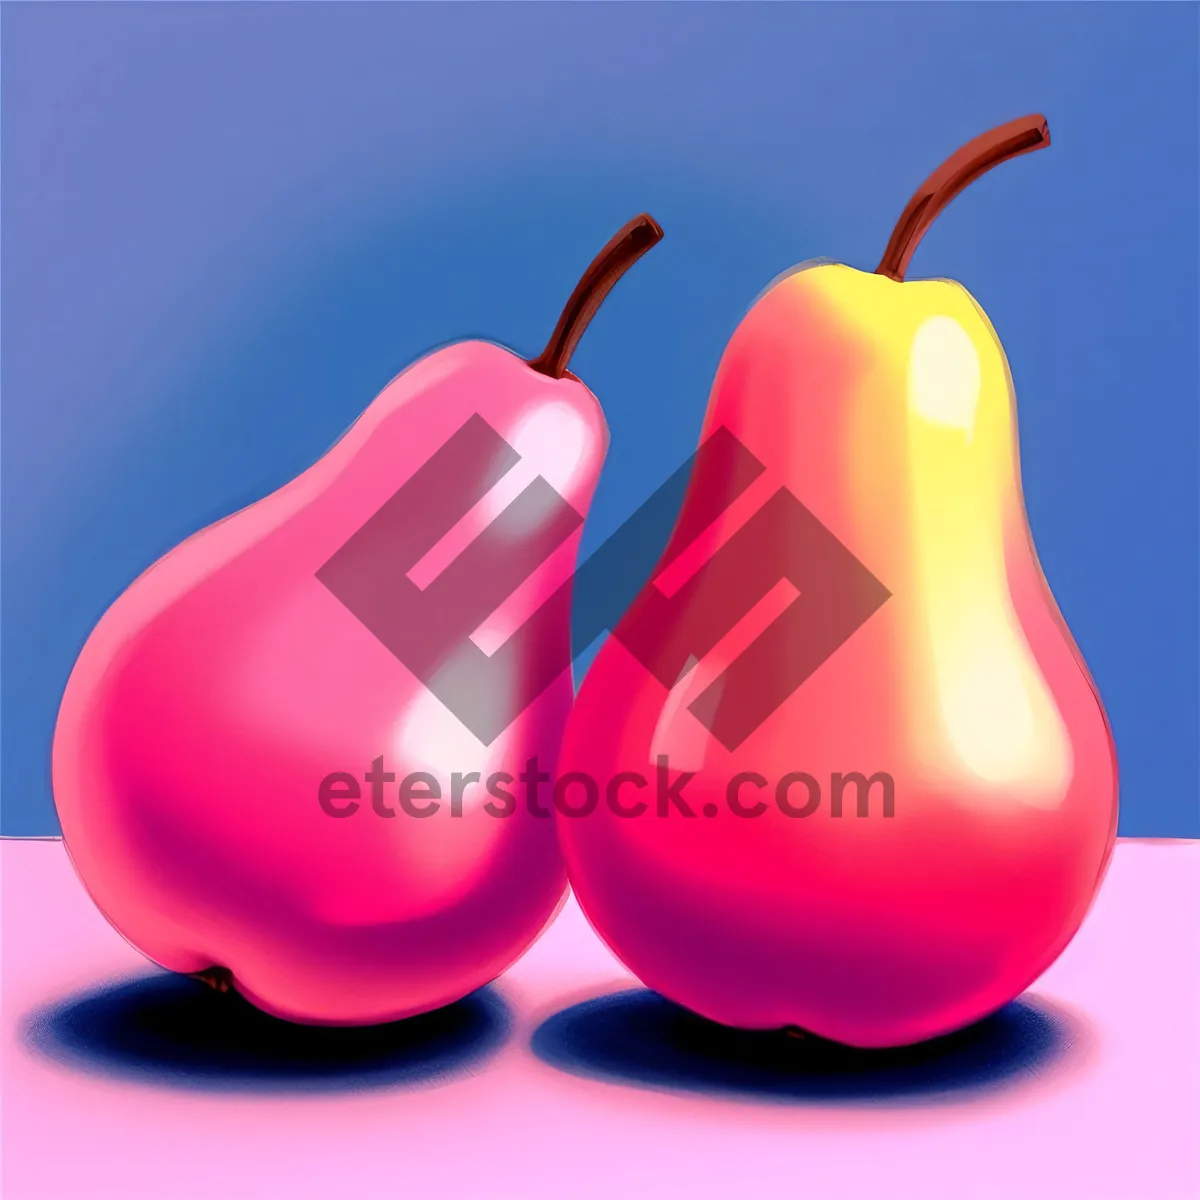 Picture of Shiny Pepper Icon Set: Sweet Symbol Design